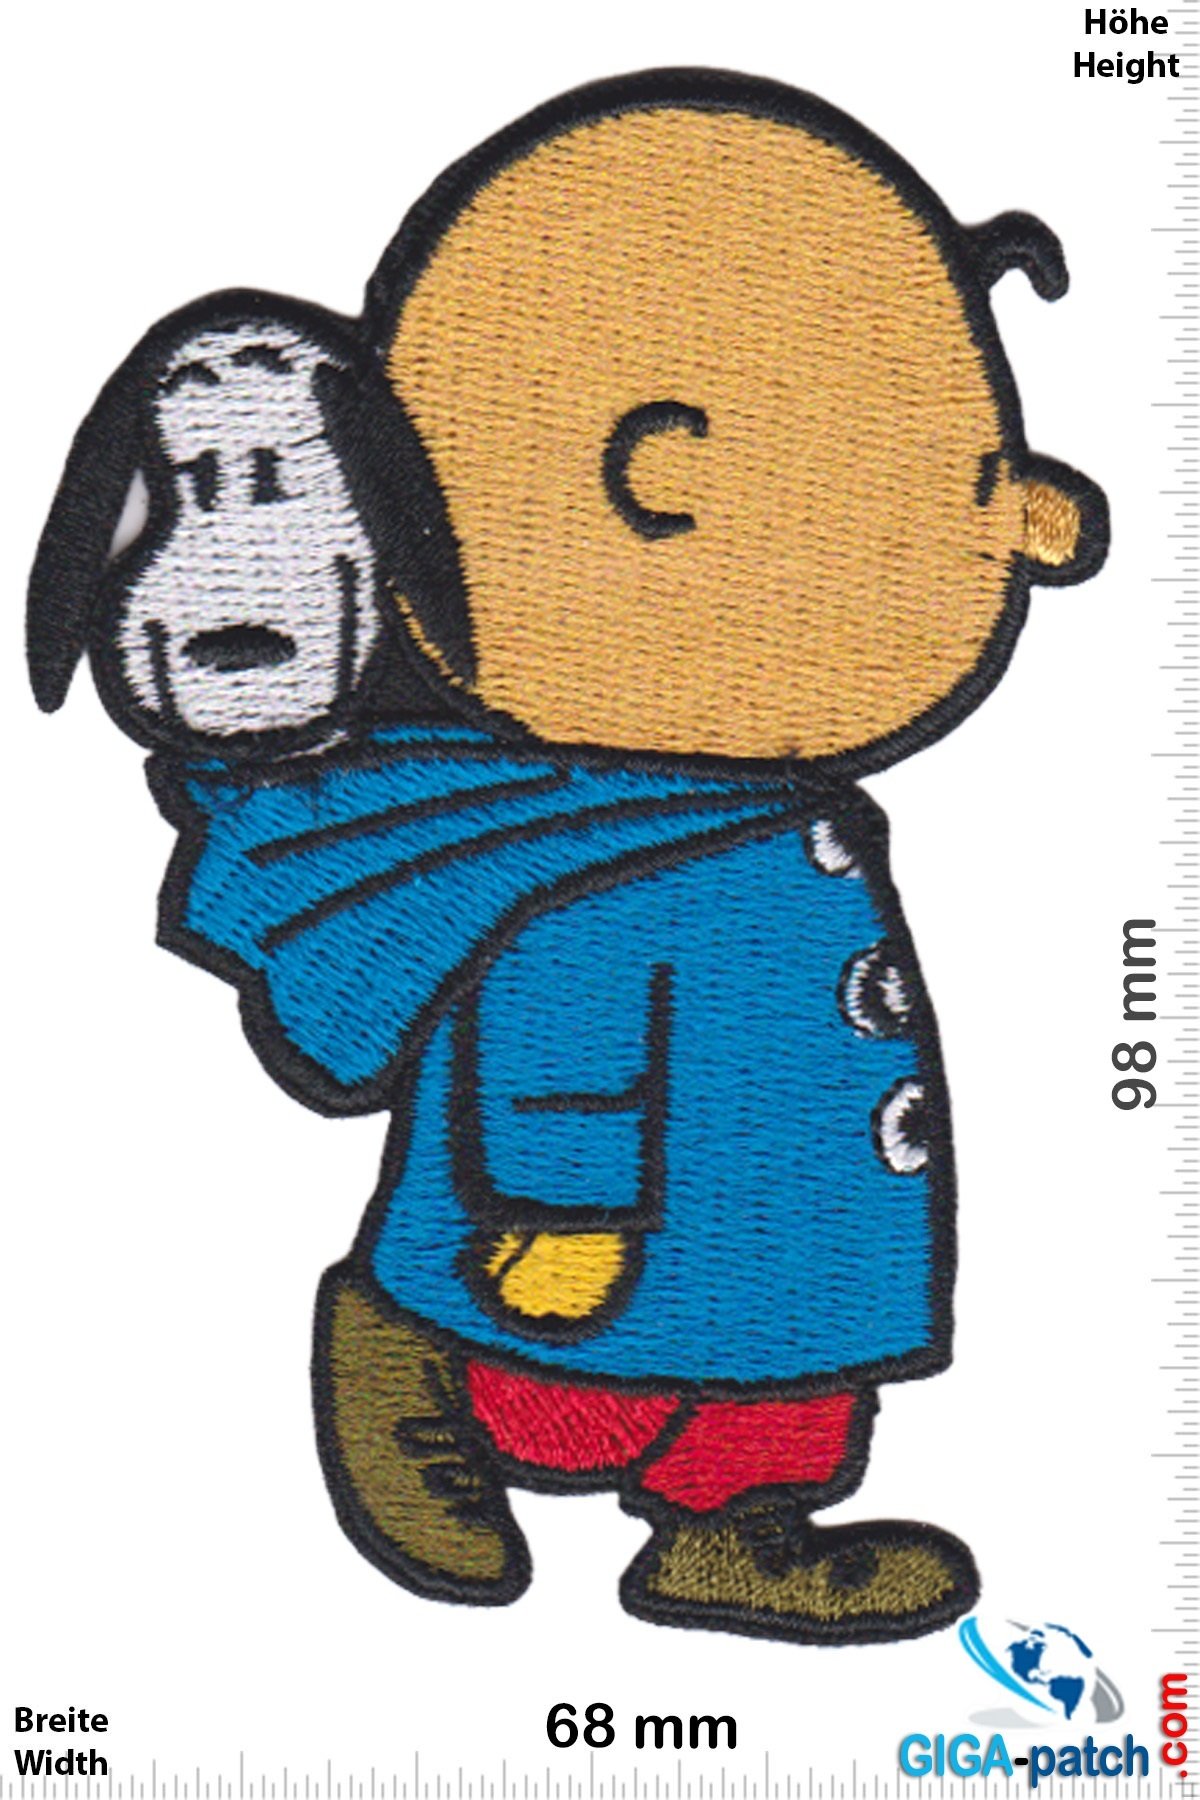 Snoopy Snoopy  - Charlie Brown -Carry - The Peanuts